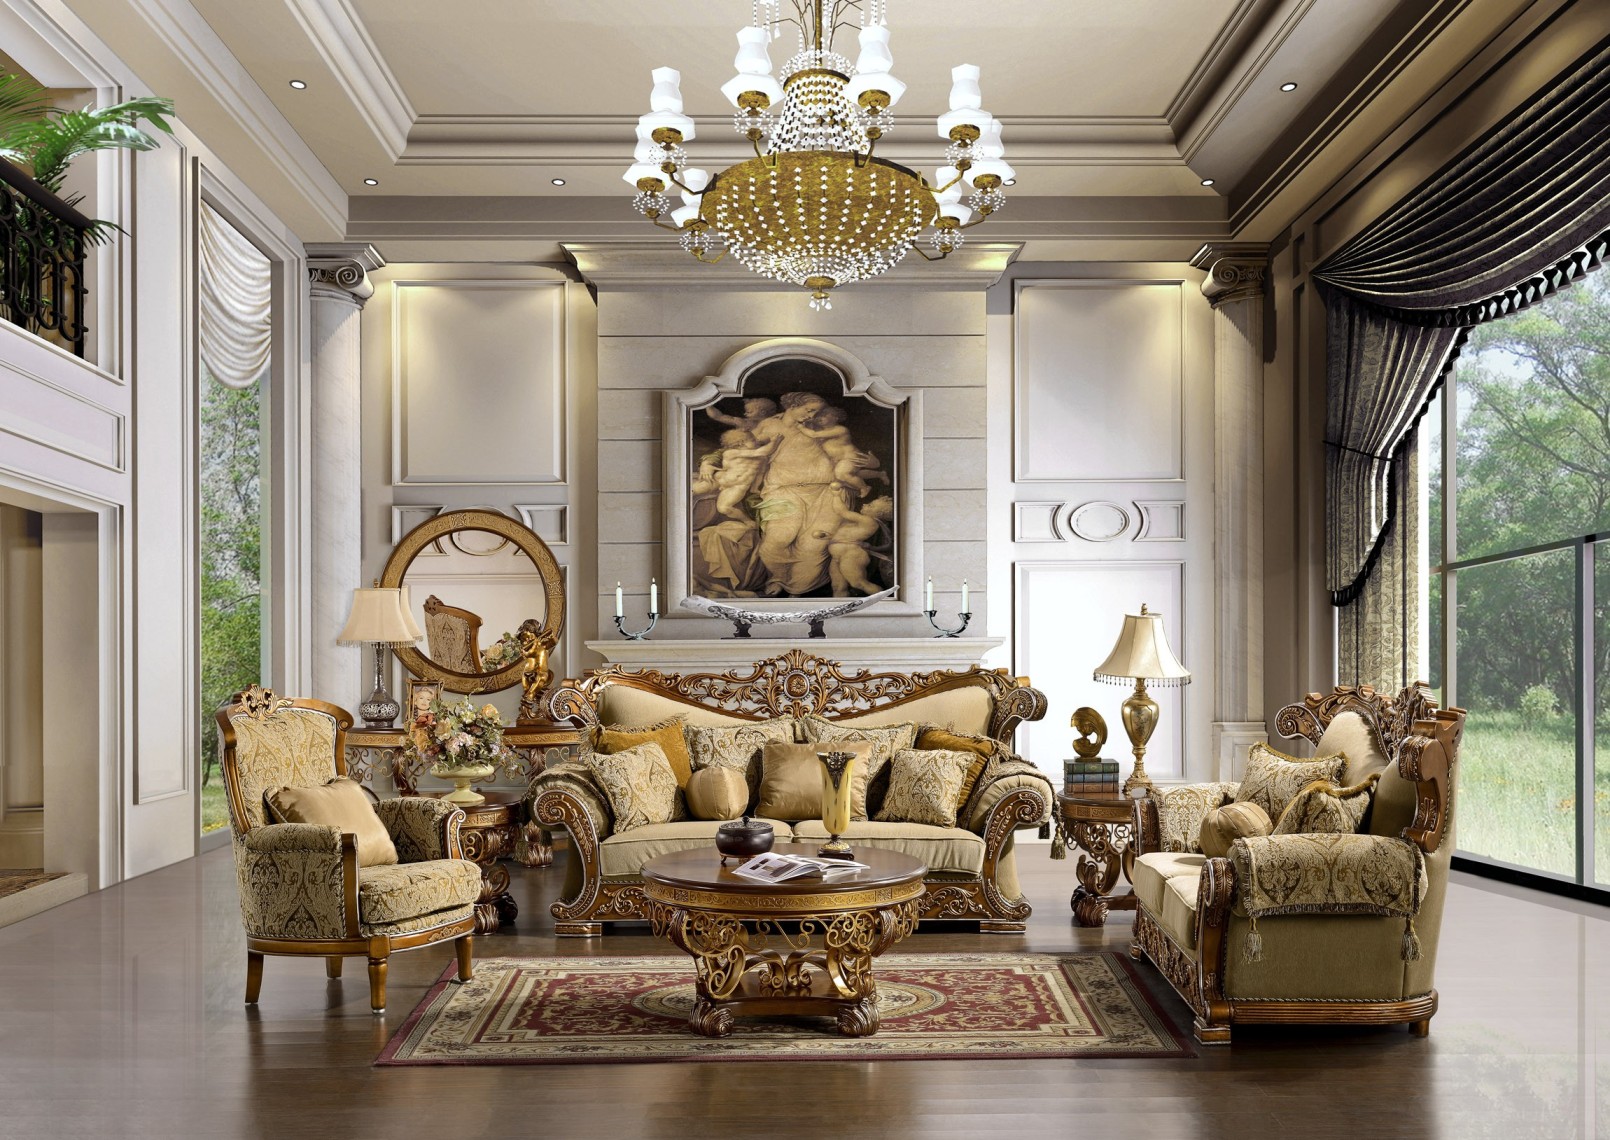 Elements Of Elegance: Luxury Decorating On A Budget